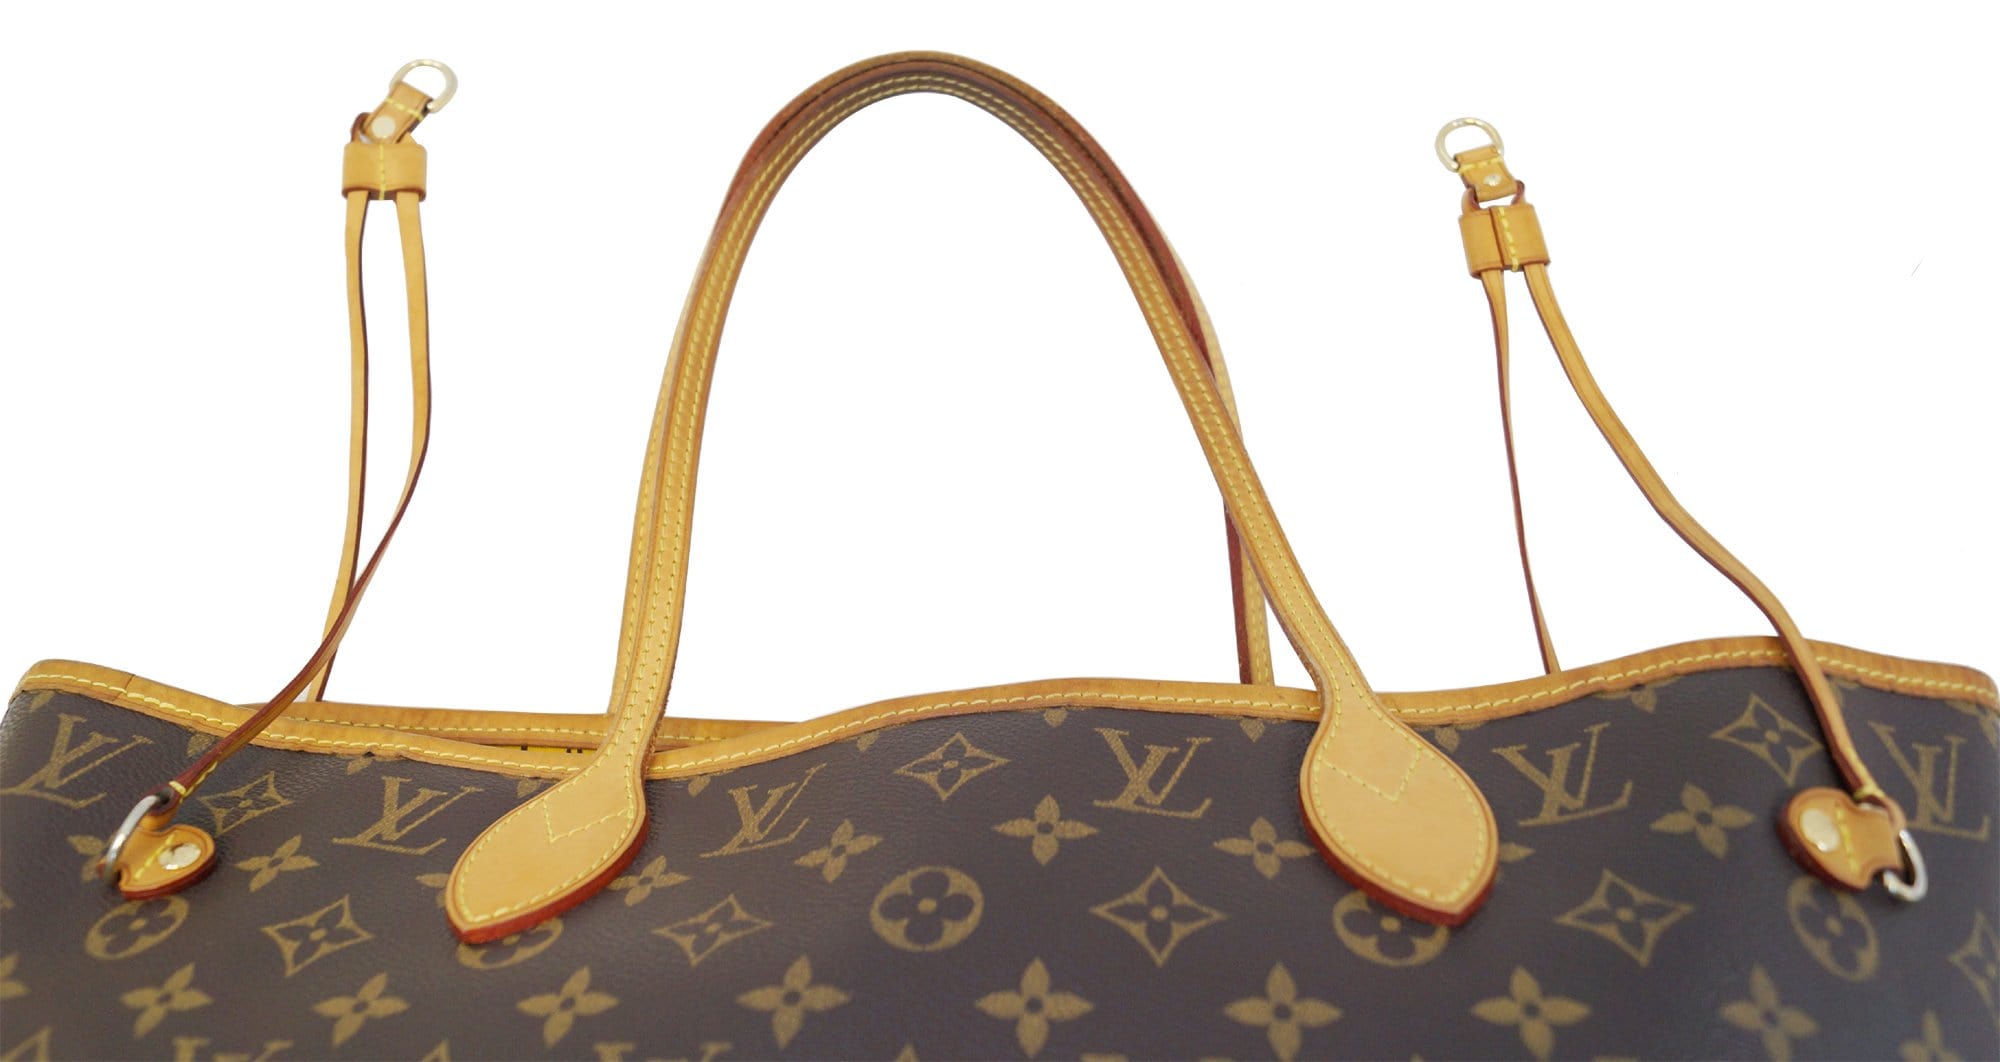 Louis Vuitton Neverfull Bags for sale in Watersmeet, Michigan